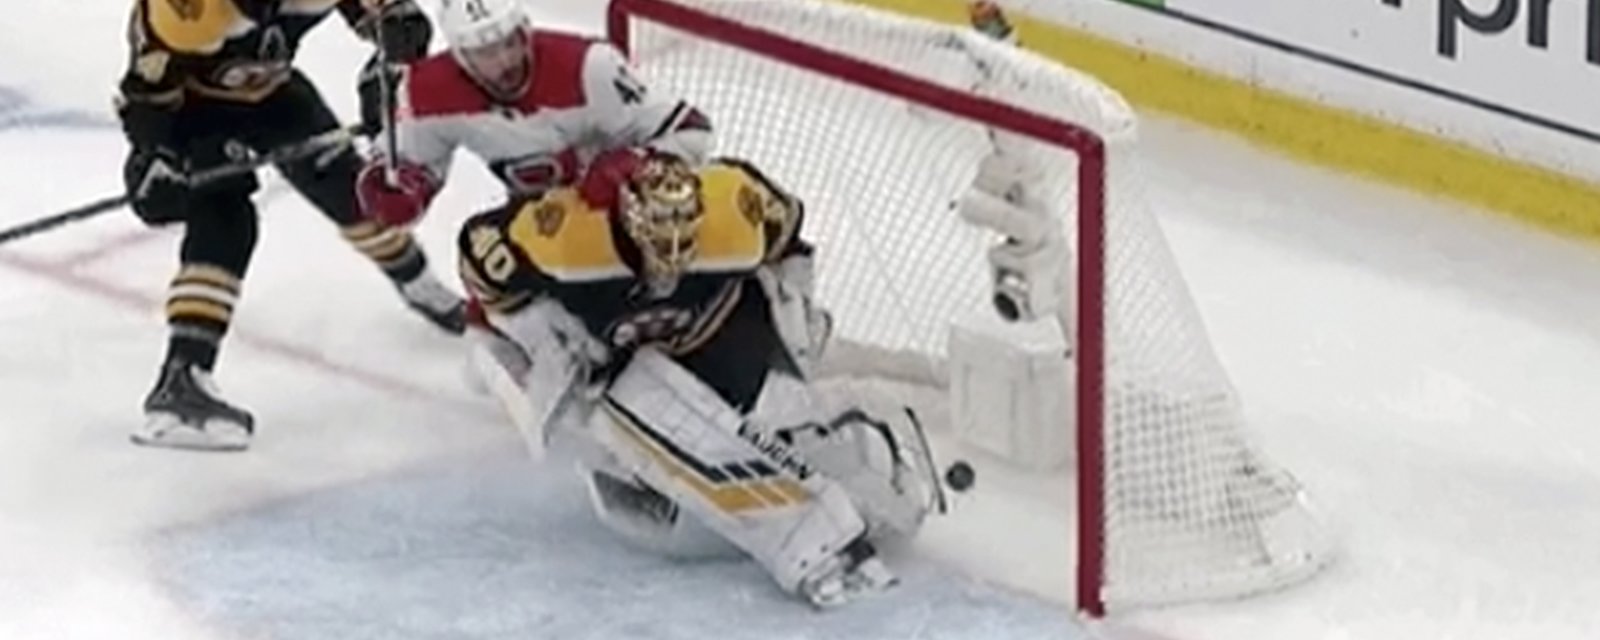 Controversial call in Boston gives Hurricanes the lead